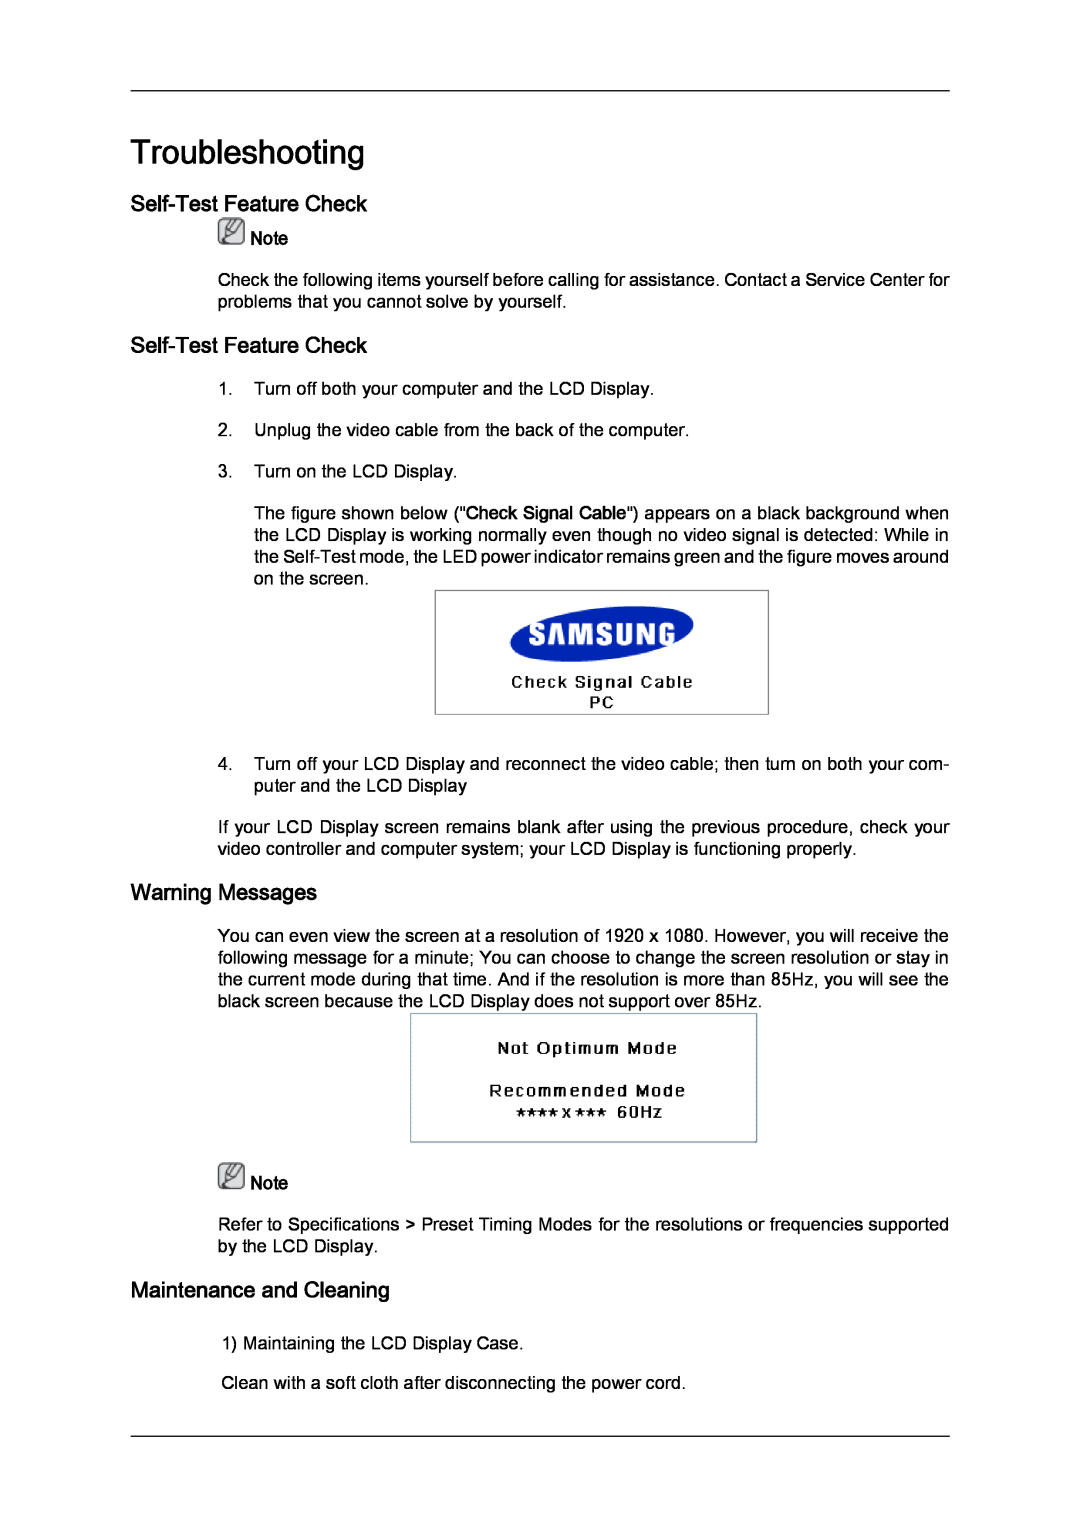 Samsung LH40MGULBC/XY, LH40MGUMBC/EN Troubleshooting, Self-Test Feature Check, Warning Messages, Maintenance and Cleaning 